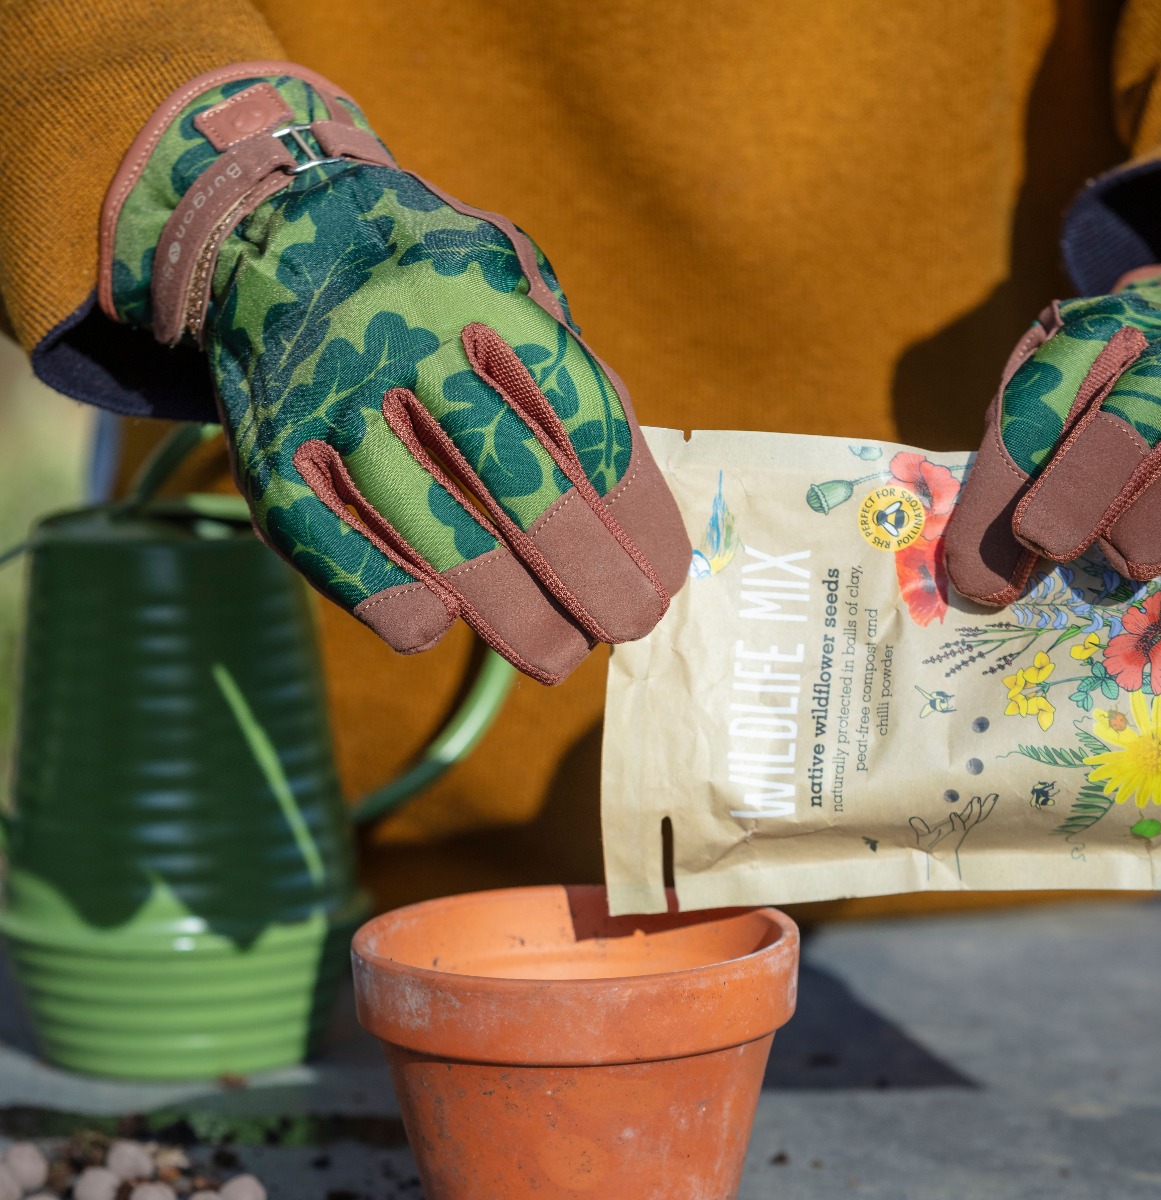 Moss Oak Leaf Gardening Gloves (£18.00), from the National Trust's gardening range. Image shows gardening gloves worn by gardener, planting seeds on a garden workbench. Every purchase from the National Trust shop helps care for nature, beauty and history for everyone, for ever.